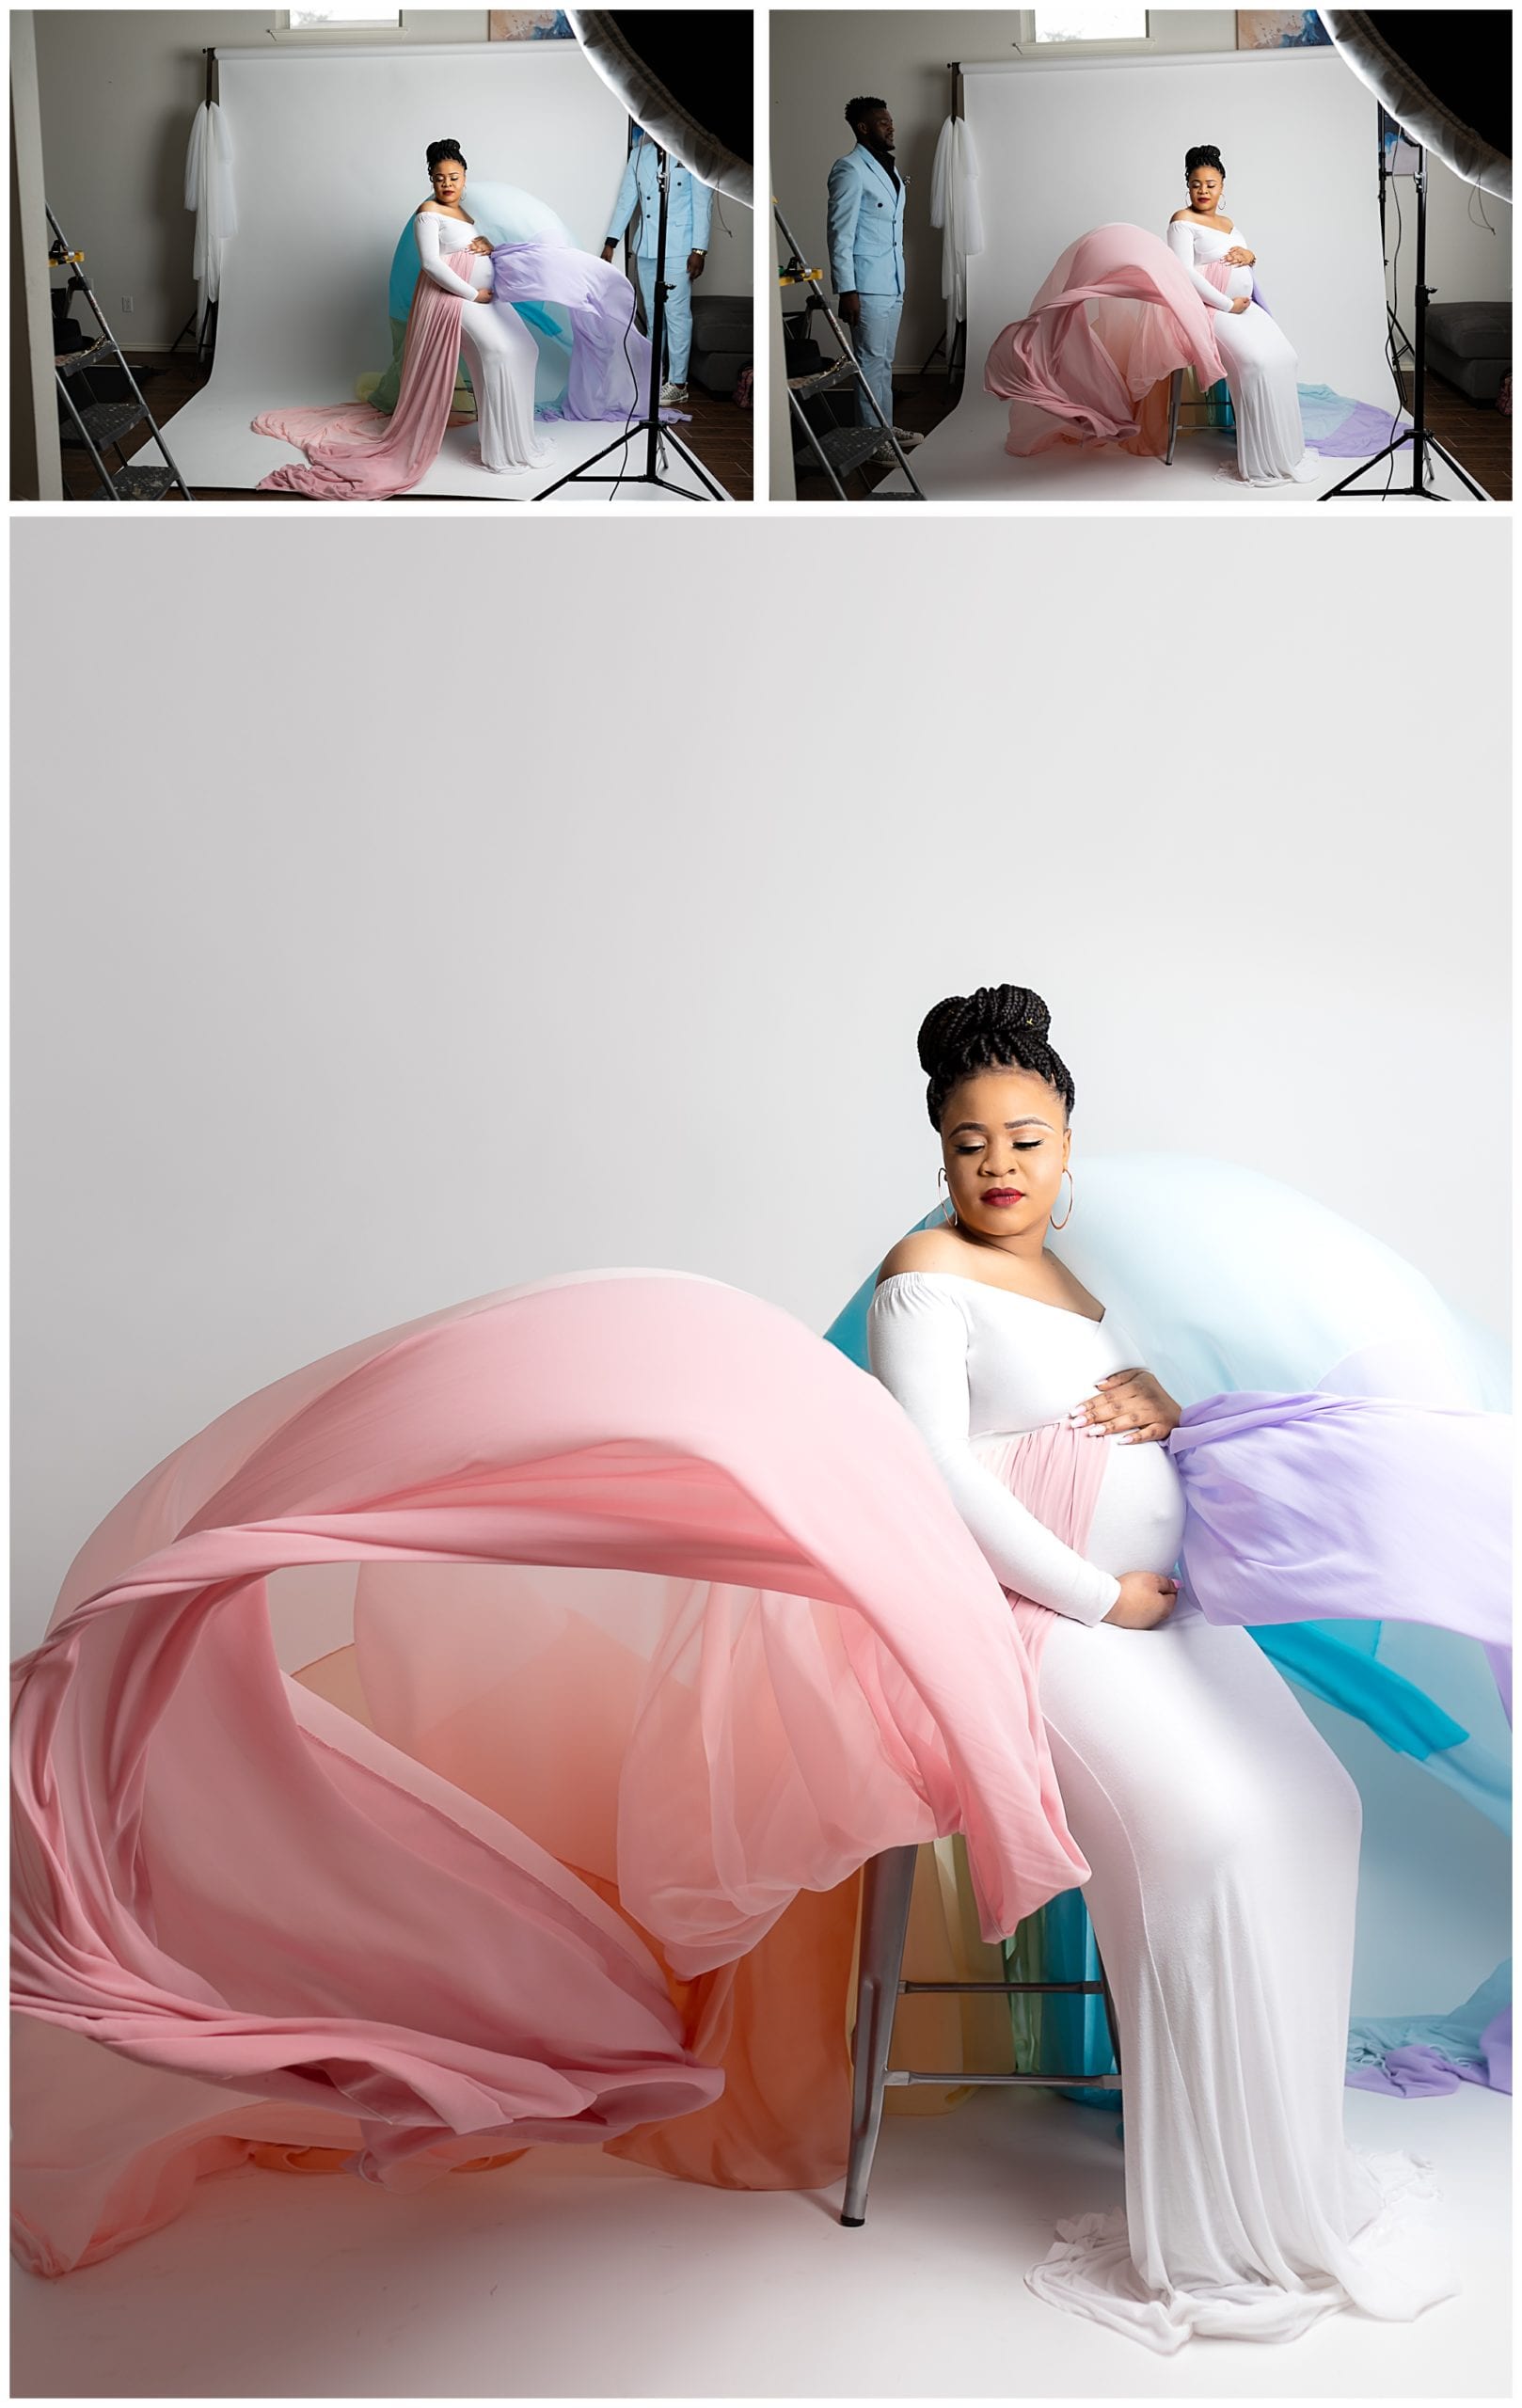 Before/after collage of a rainbow maternity dress with tossing effects.